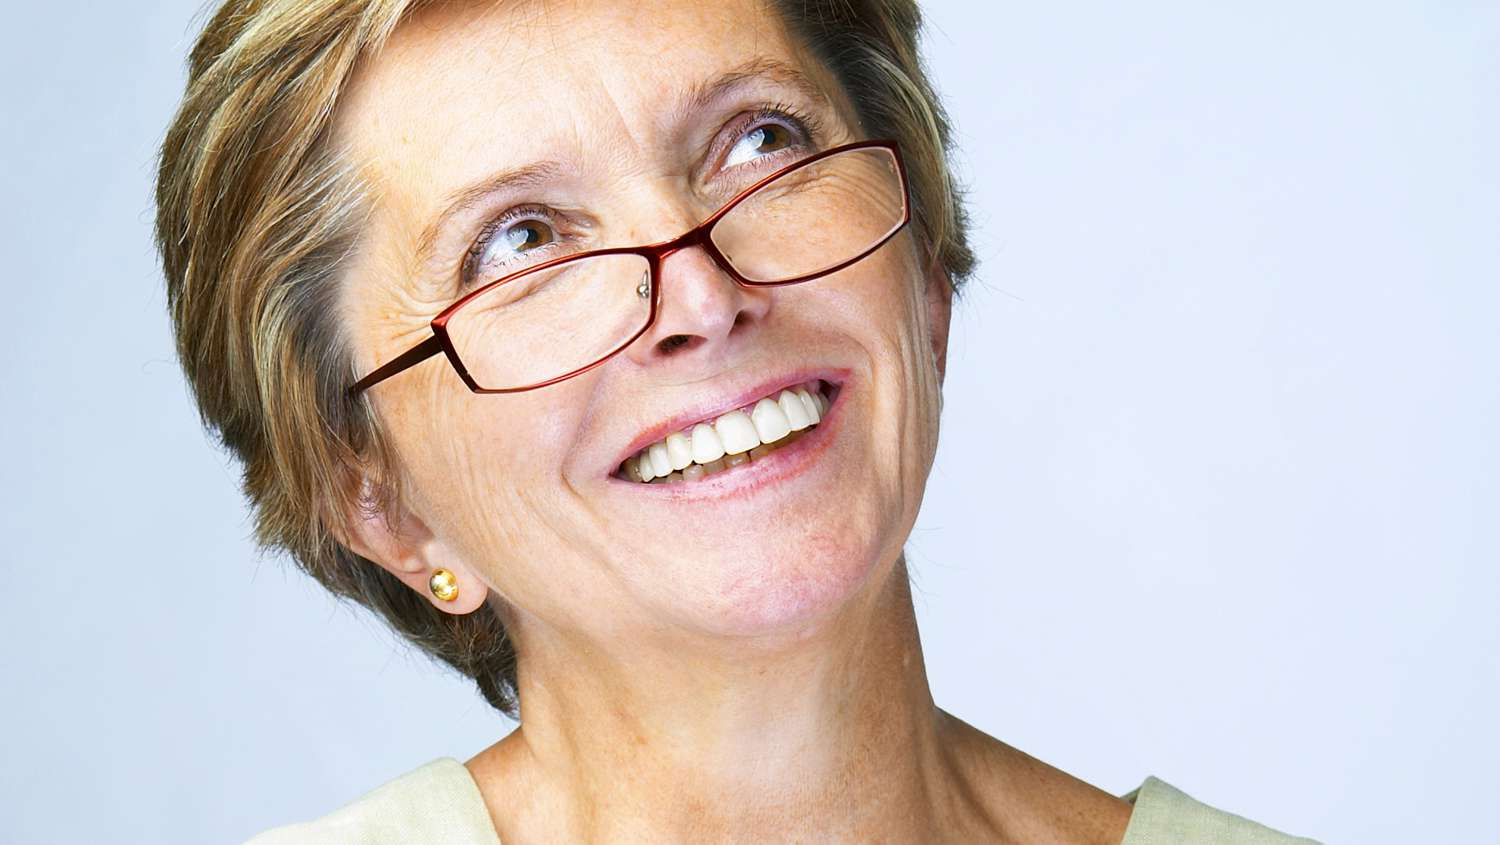 Hairstyles For Women Over 60 With Glasses
 Learn about the best short hairstyles for women over 60